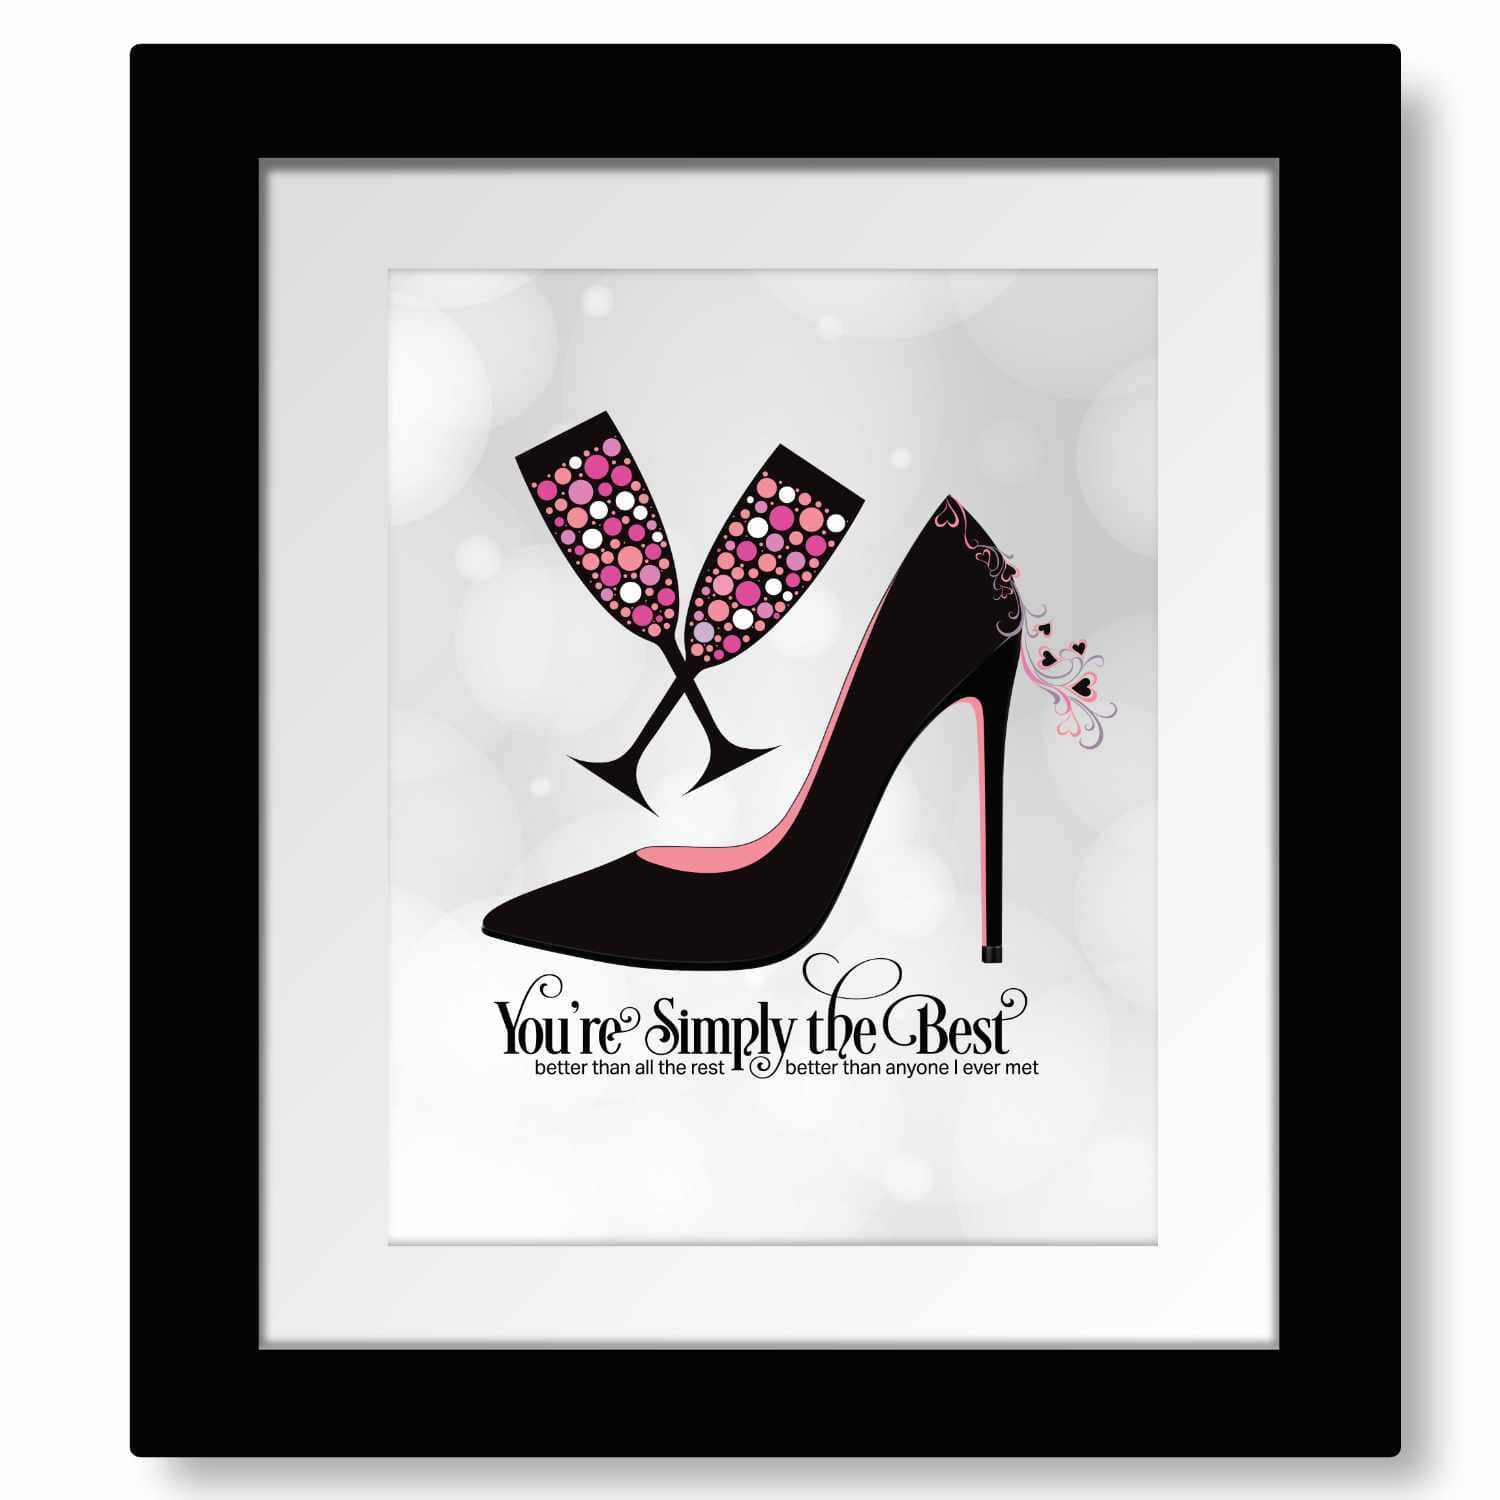 The Best by Tina Turner - 80s Song Lyric Wall Print Poster Song Lyrics Art Song Lyrics Art 